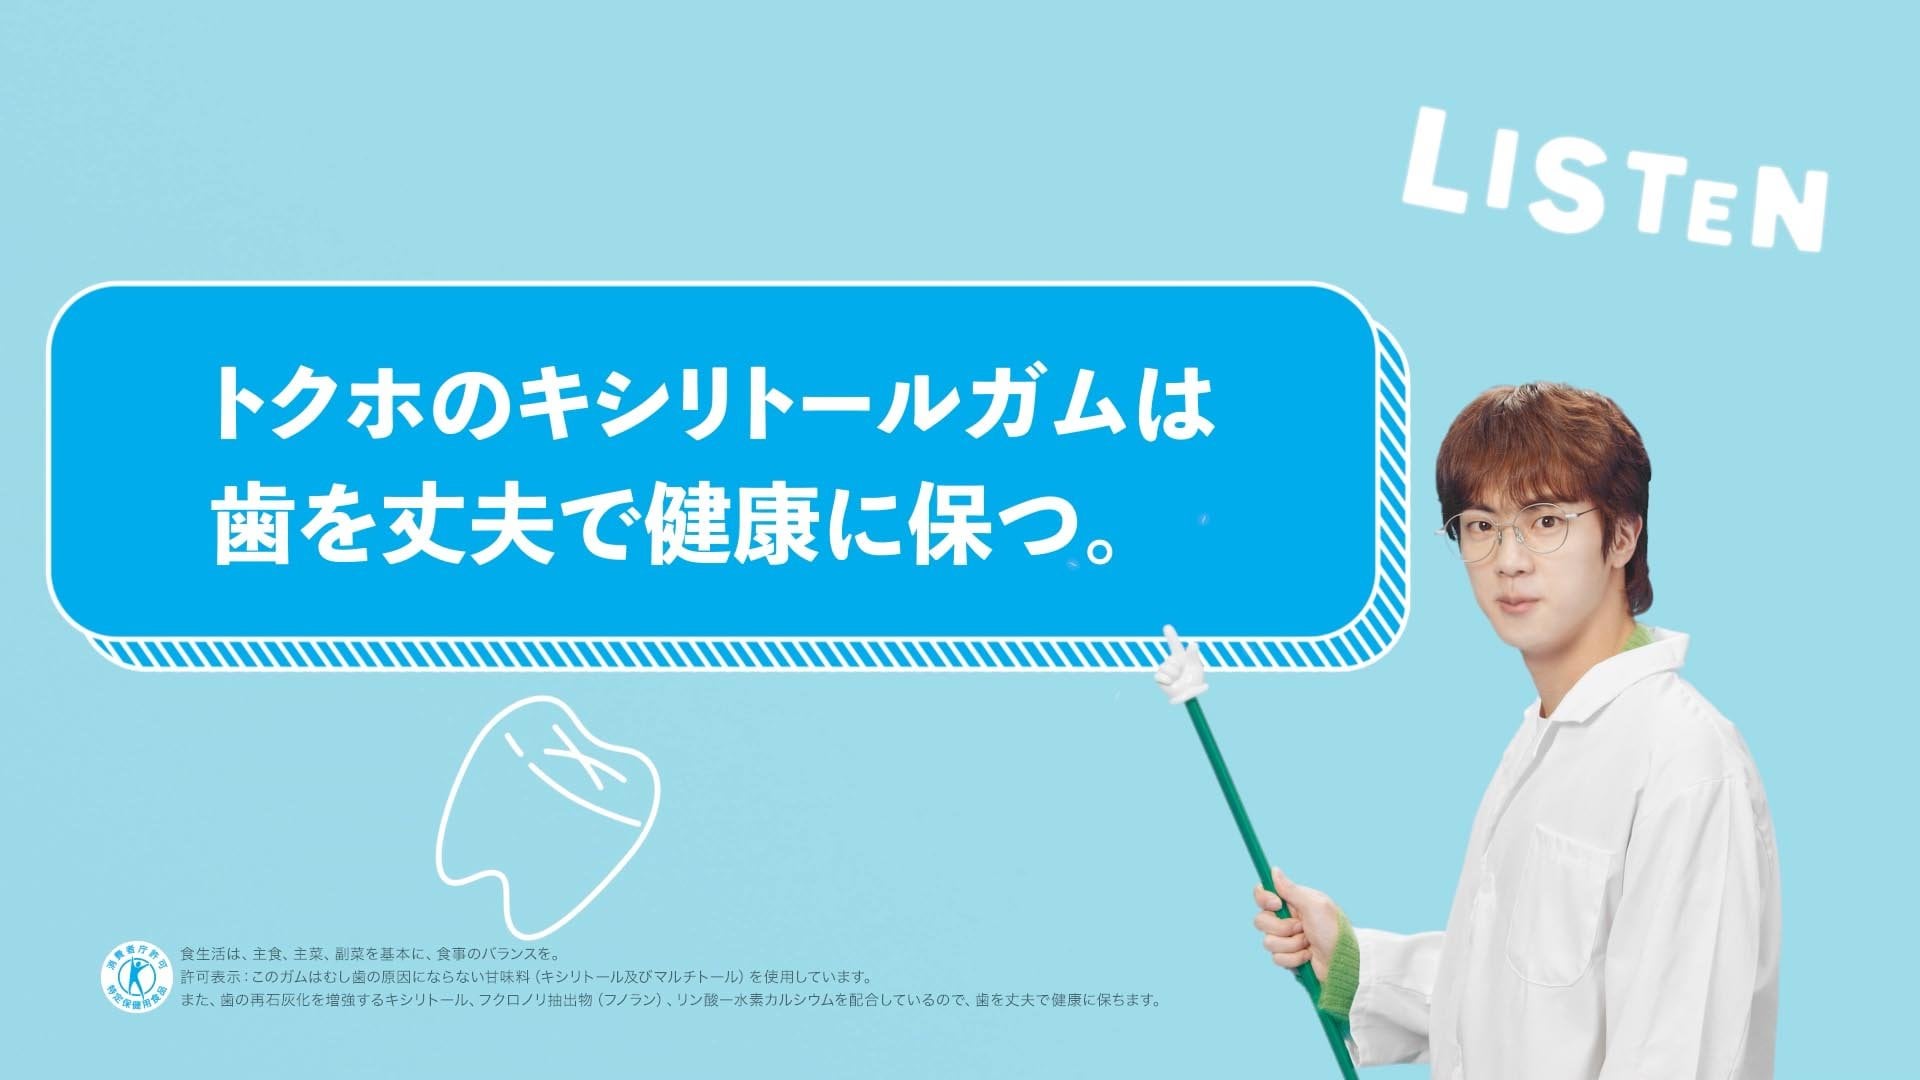 231103 LOTTE XYLITOL on Twitter: BTS XYLITOL LESSON - Jin